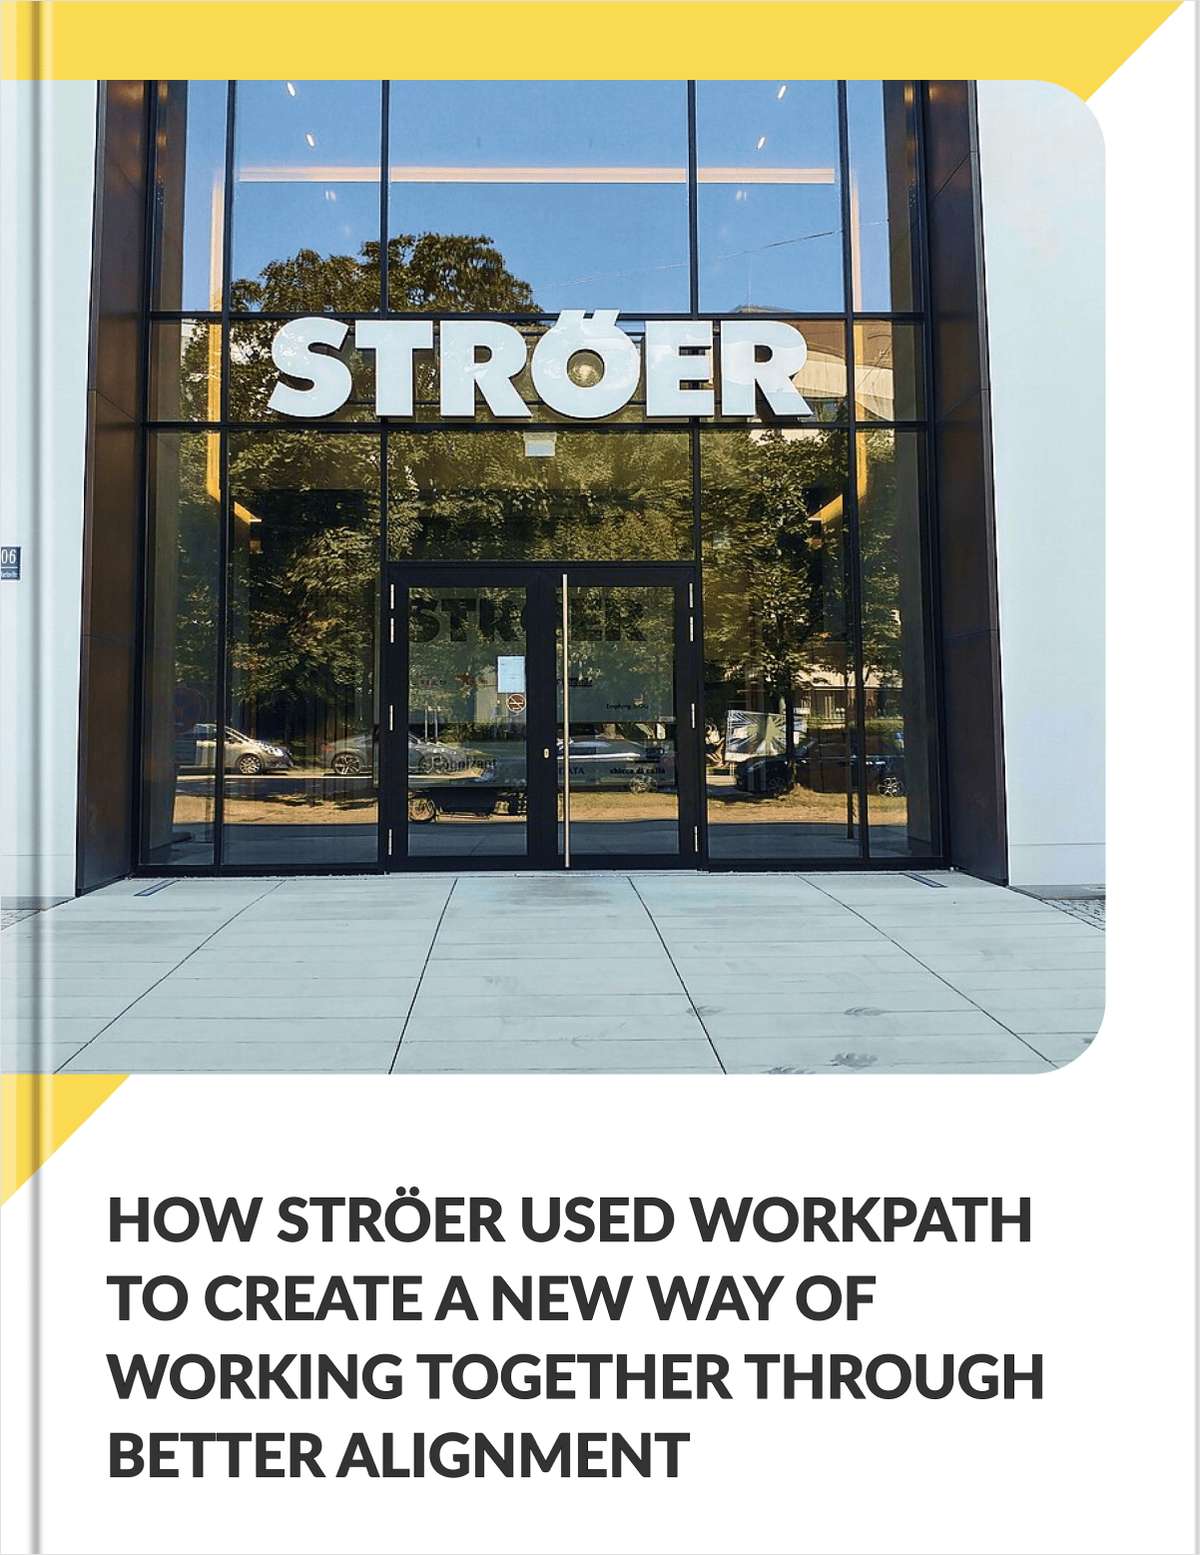 How better alignment helped Ströer improve their way of working